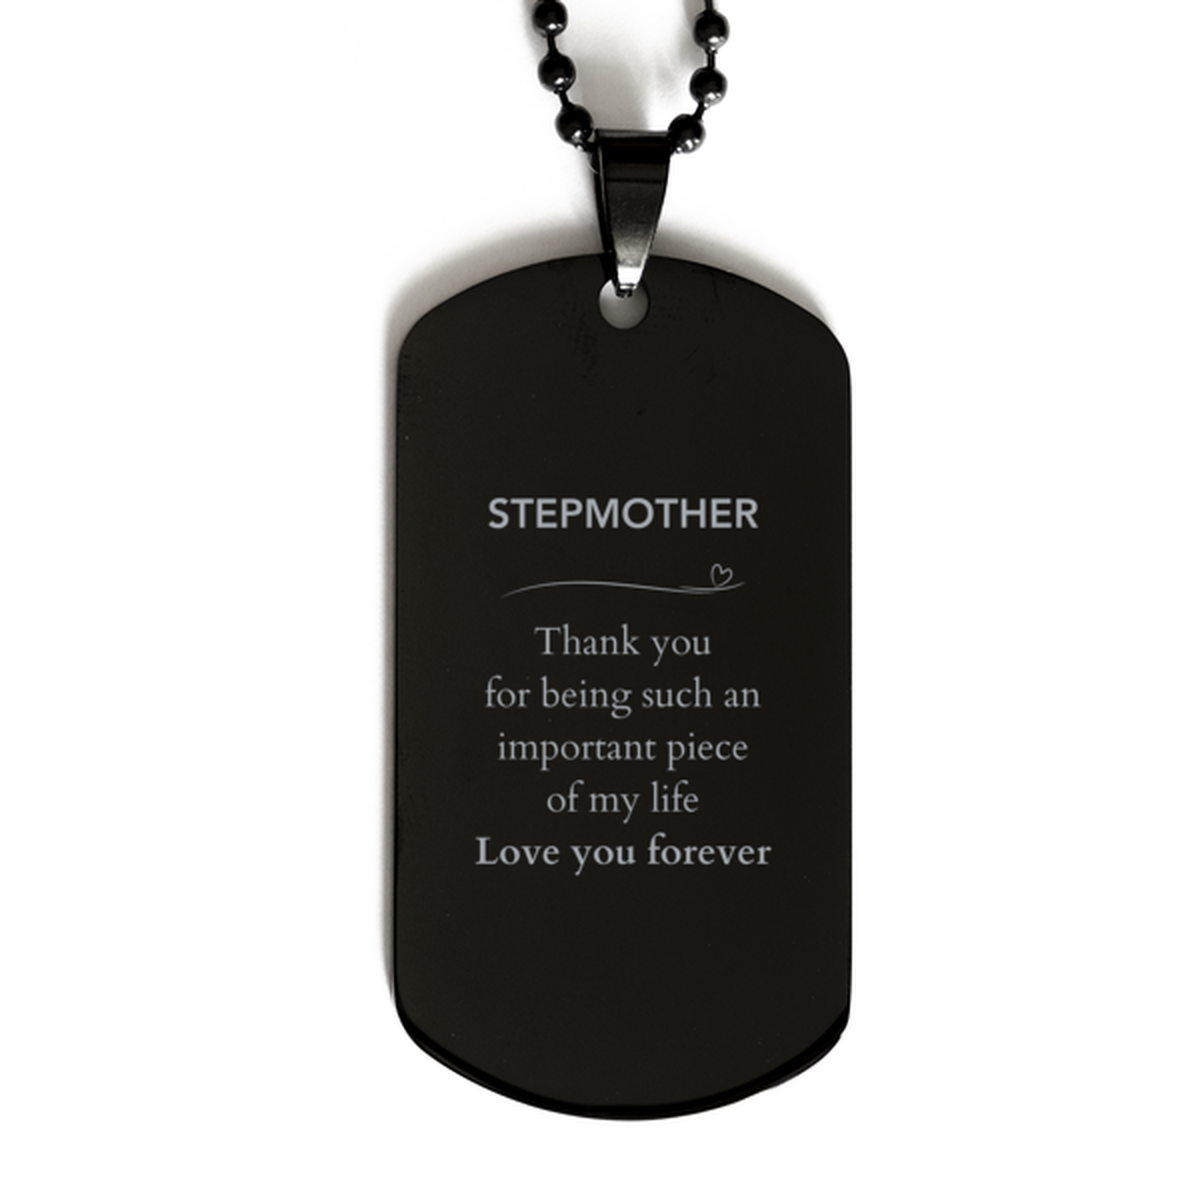 Appropriate Stepmother Black Dog Tag Epic Birthday Gifts for Stepmother Thank you for being such an important piece of my life Stepmother Christmas Mothers Fathers Day